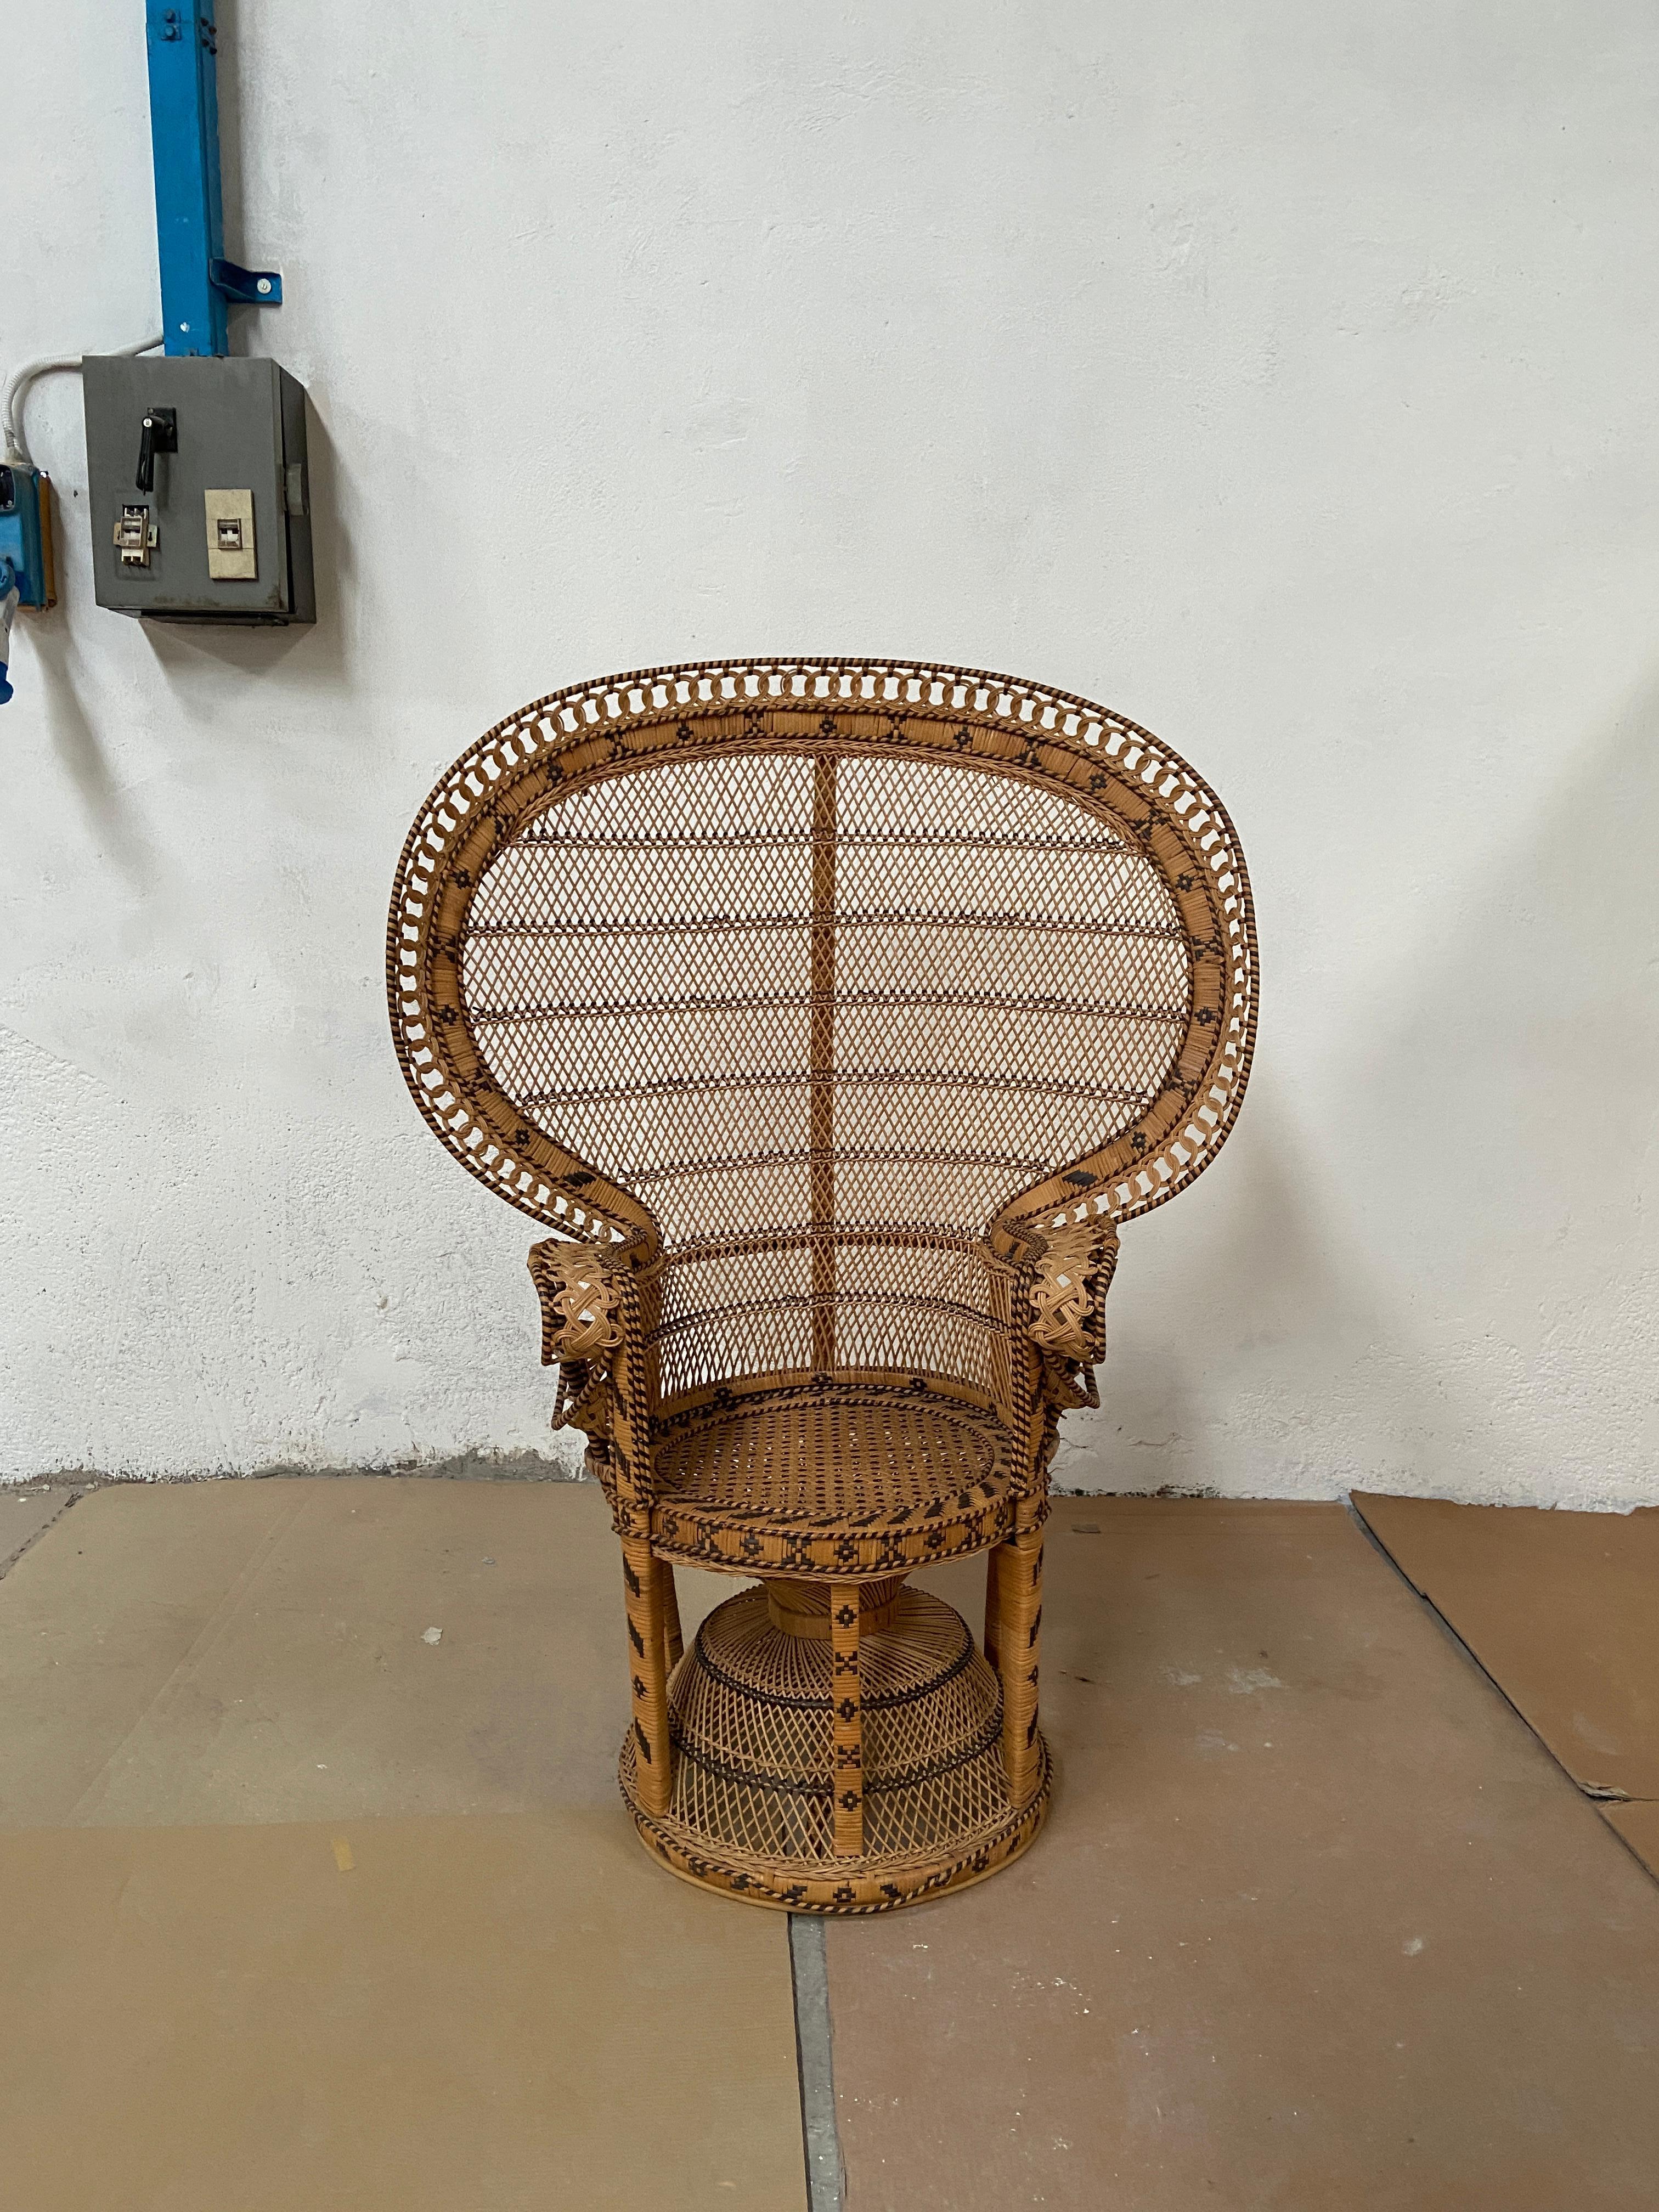 A two-tone Indonesian peacock chair made out of bamboo and rattan. 
This chair became iconic since it was an eyecatcher in the famous ‘Emanuelle’ movie. 
The chair is in a very good original condition.